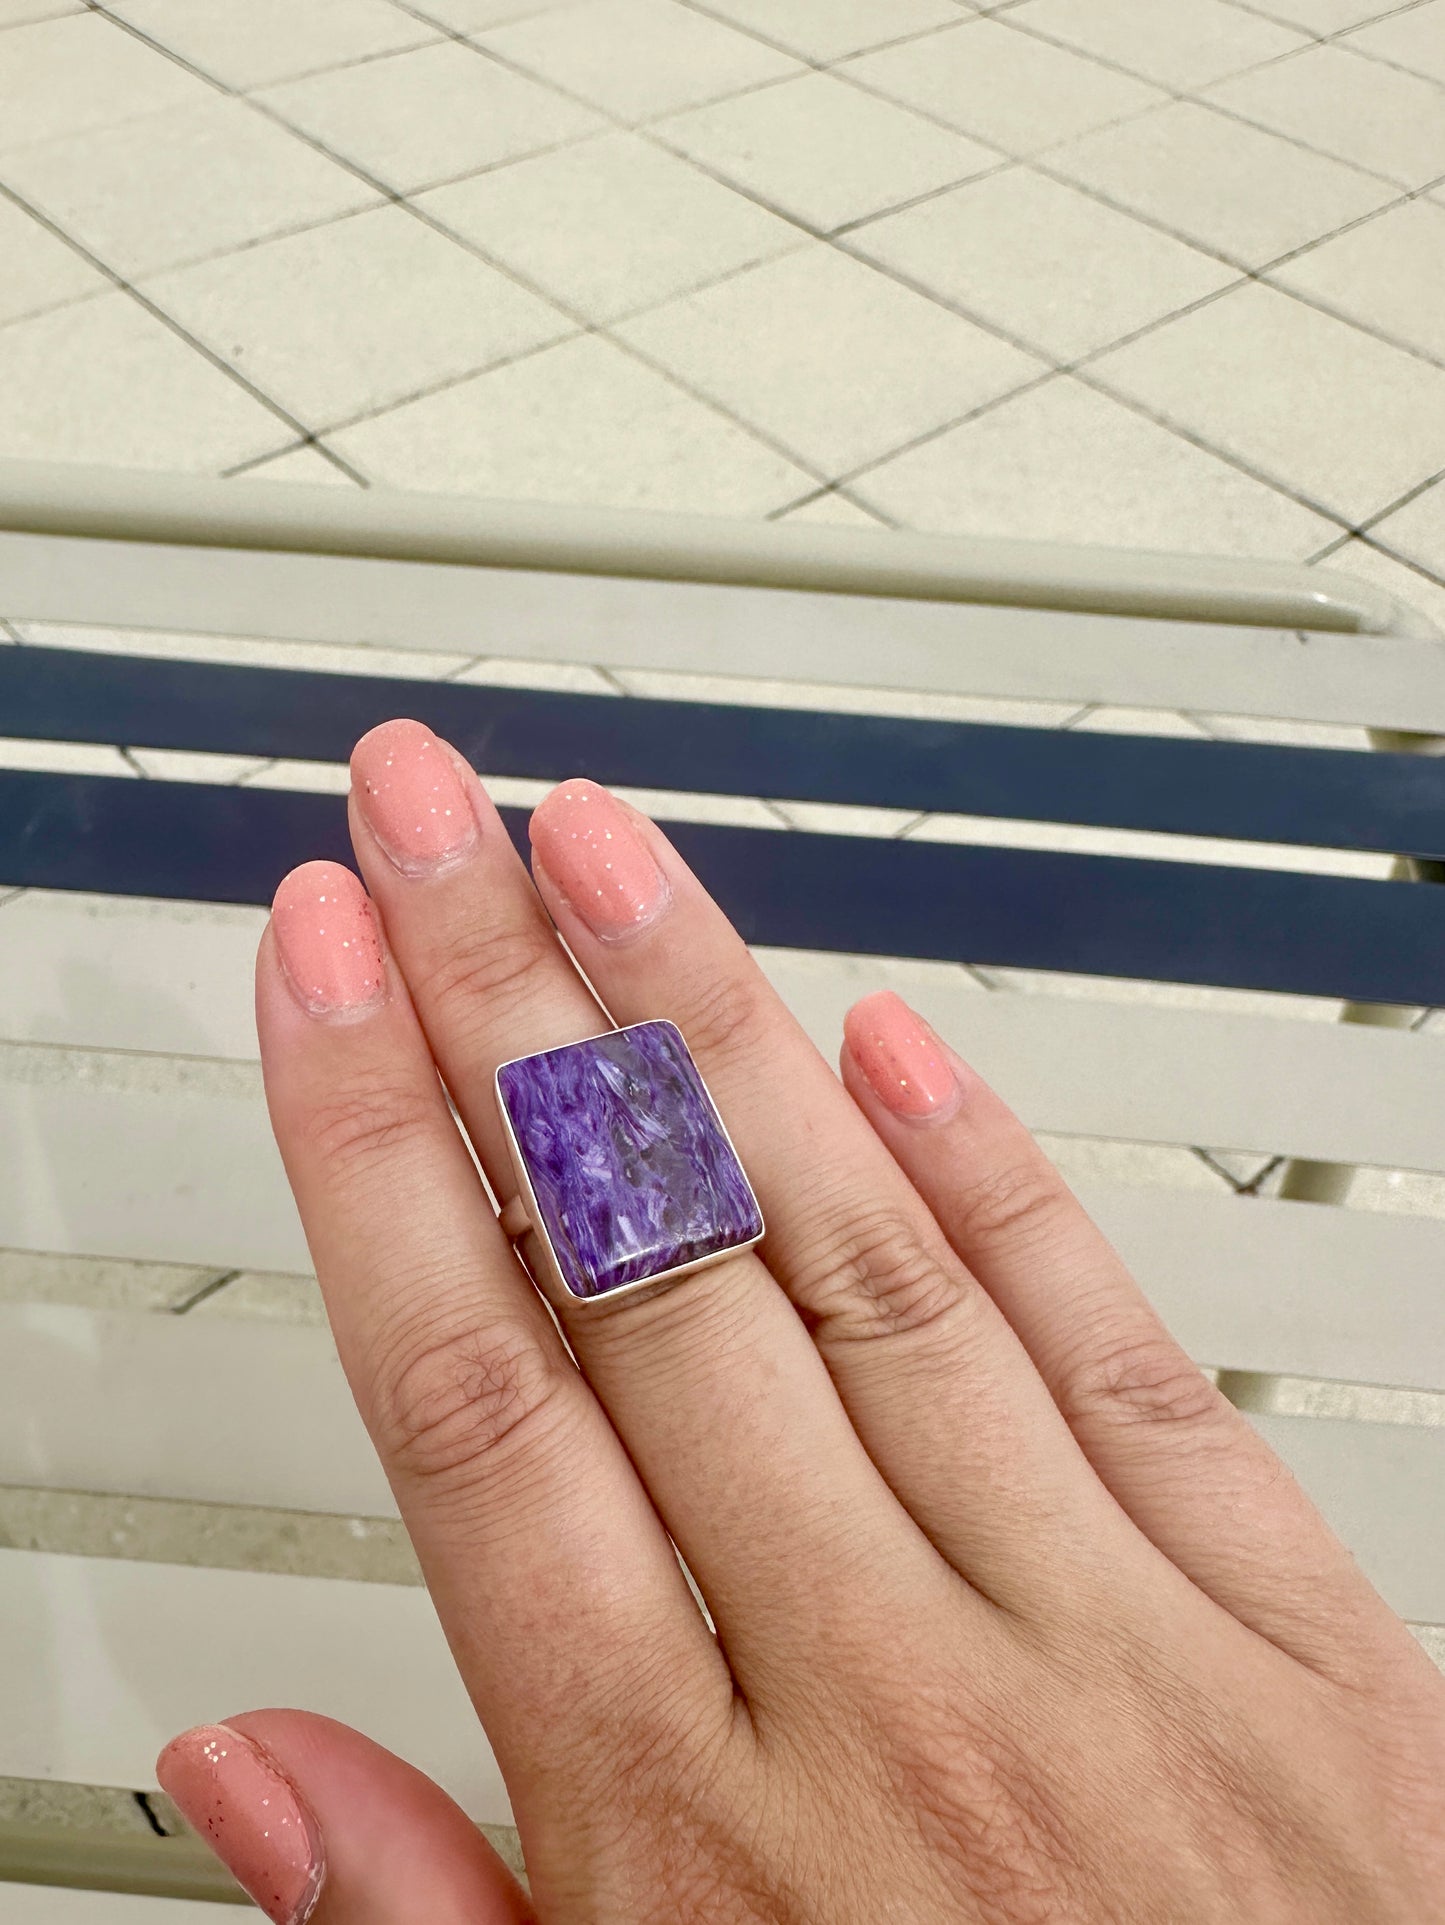 Charoite Sterling Silver Ring, Size 8.75, Exquisite Purple Gemstone, Elegant Handcrafted Jewelry, Perfect Gift for Special Occasions, Unique Artisan Design